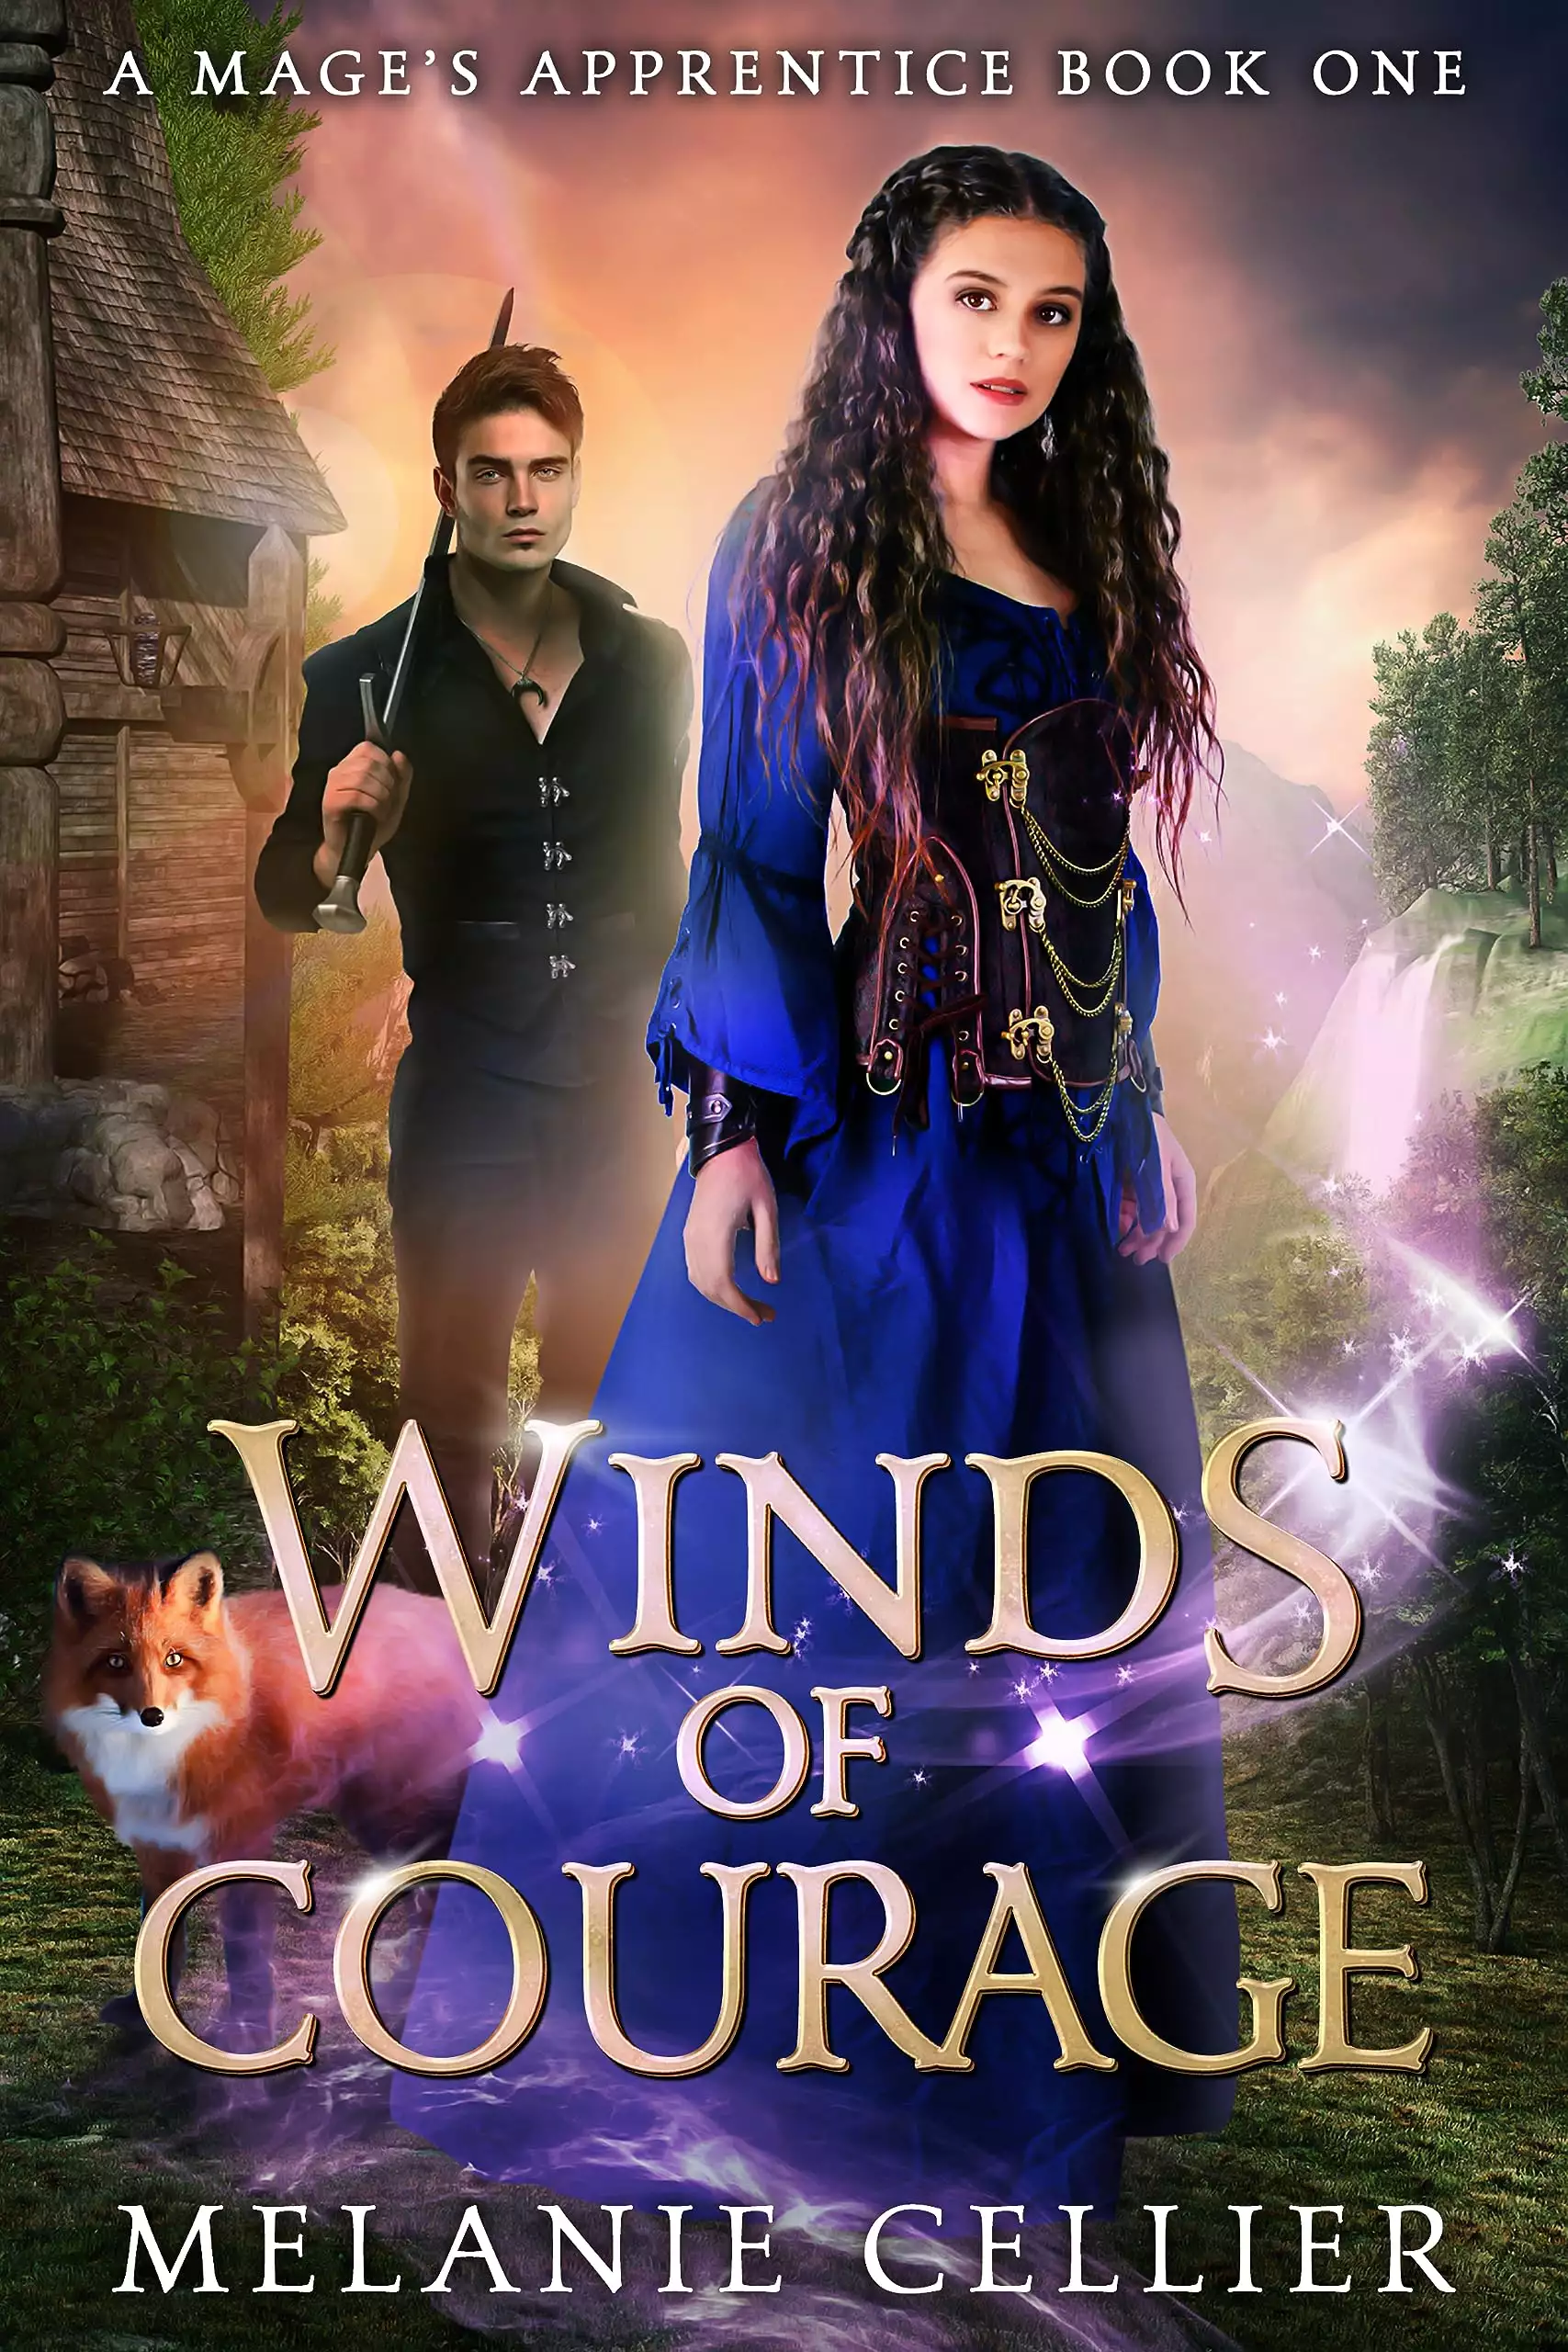 Winds of Courage